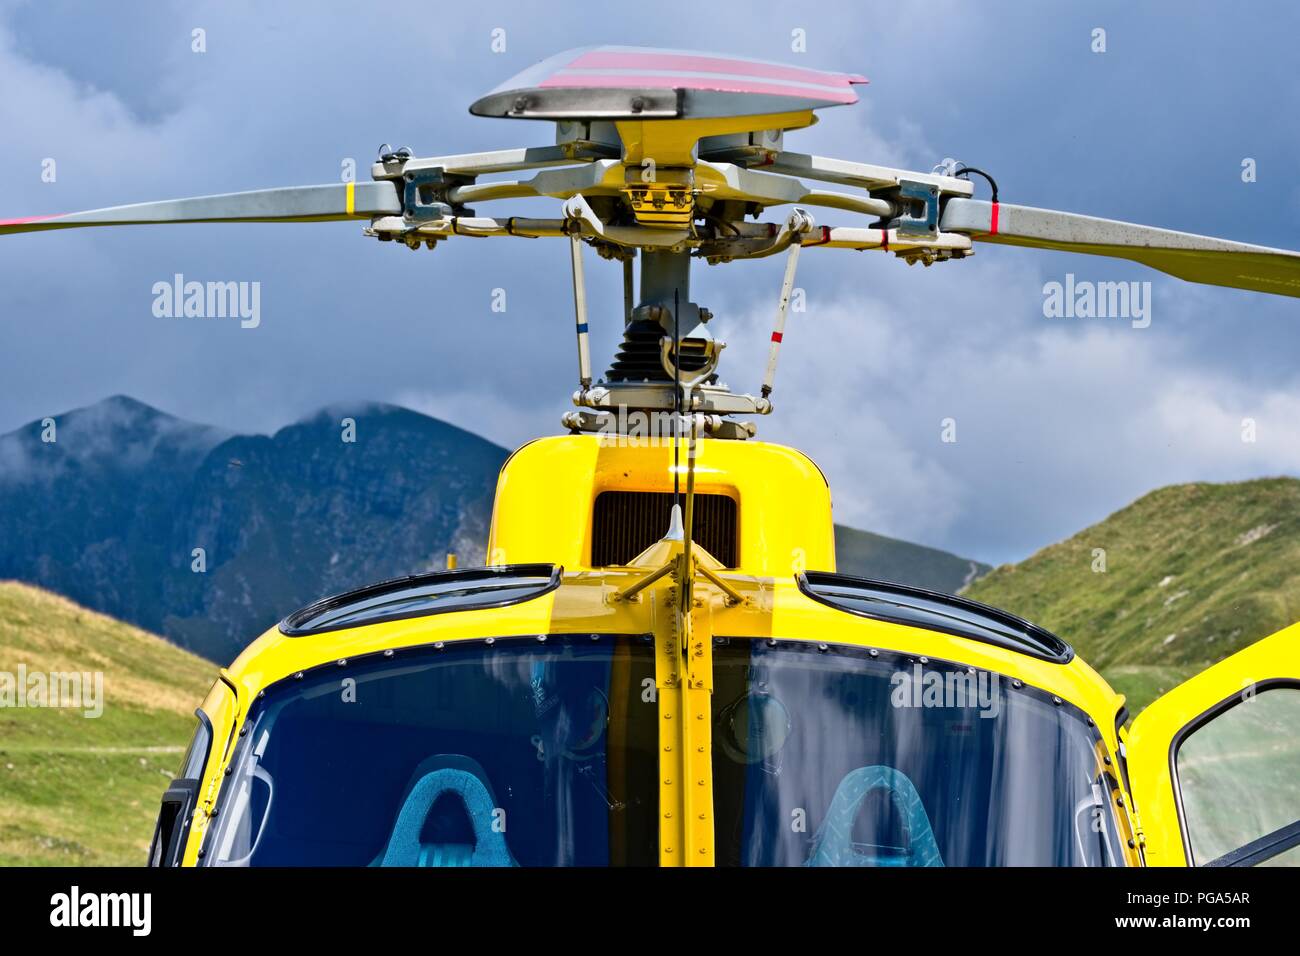 Yellow helicopter close up on the rotors. Air Vehicle, Built Structure, Gold, Helicopter, Manufactured Object Stock Photo